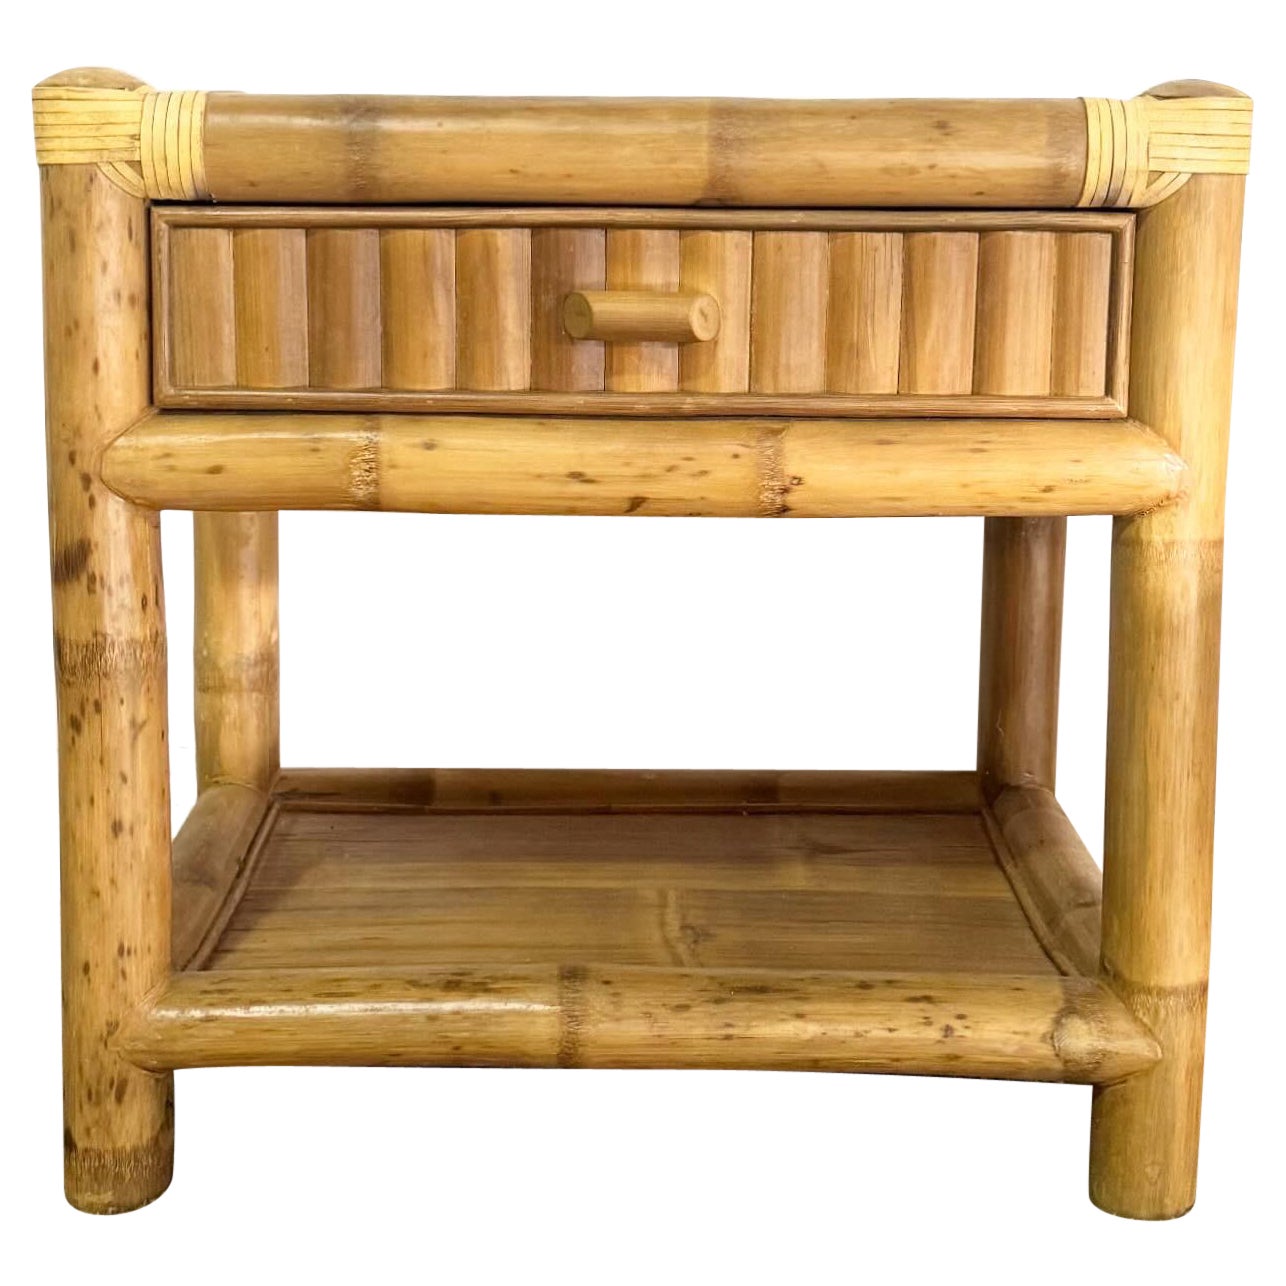 Boho Chic Bamboo Rattan Nightstand With Glass Top For Sale